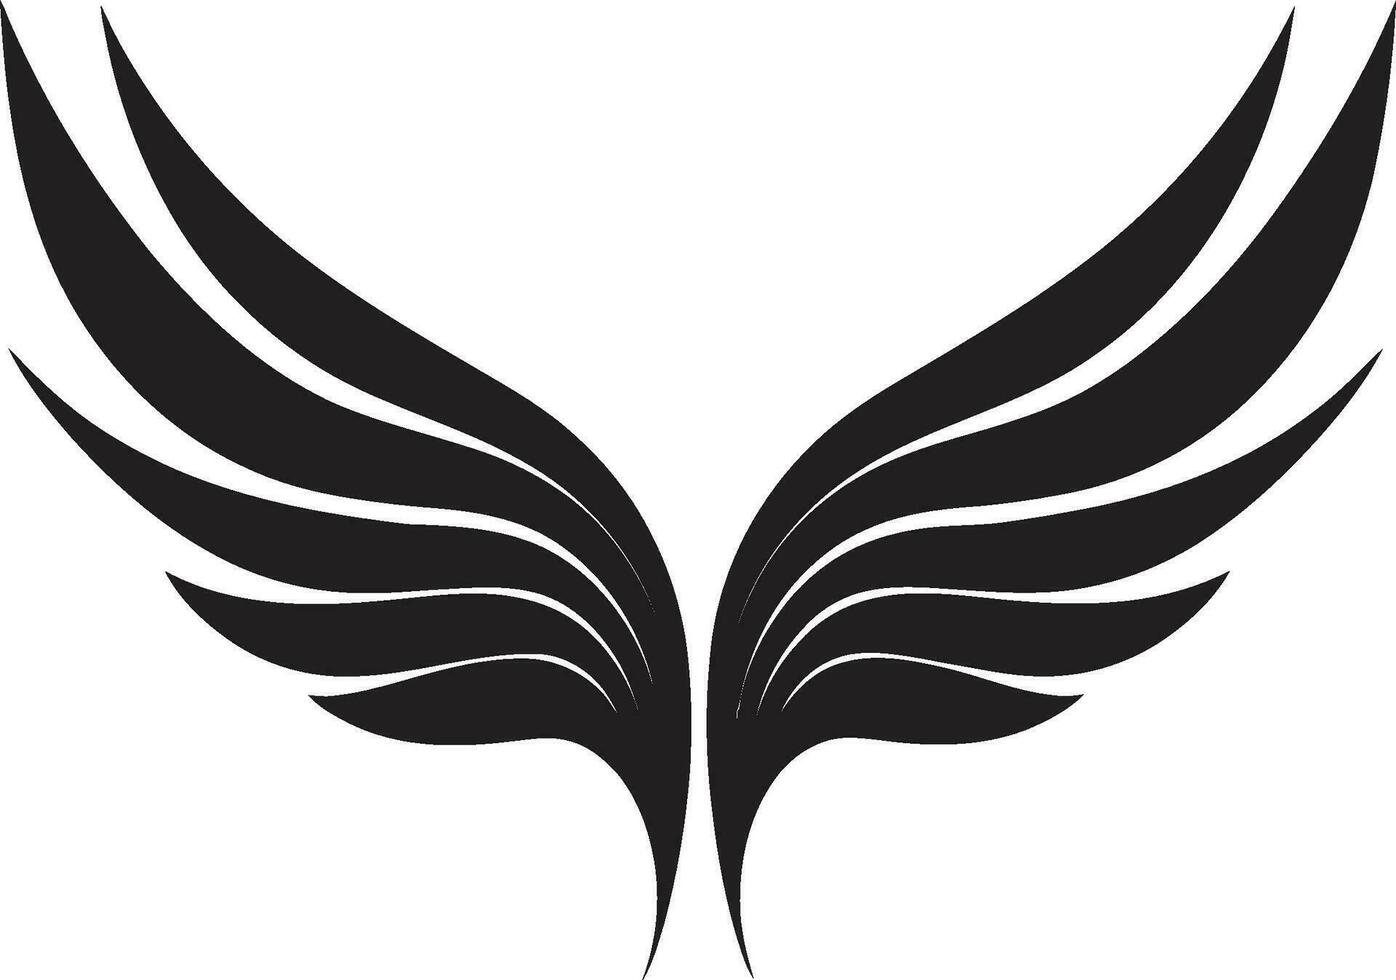 Serenade in Black and White Iconic Angelic Wings Logo Celestial Majesty in Simplicity Monochrome Design vector